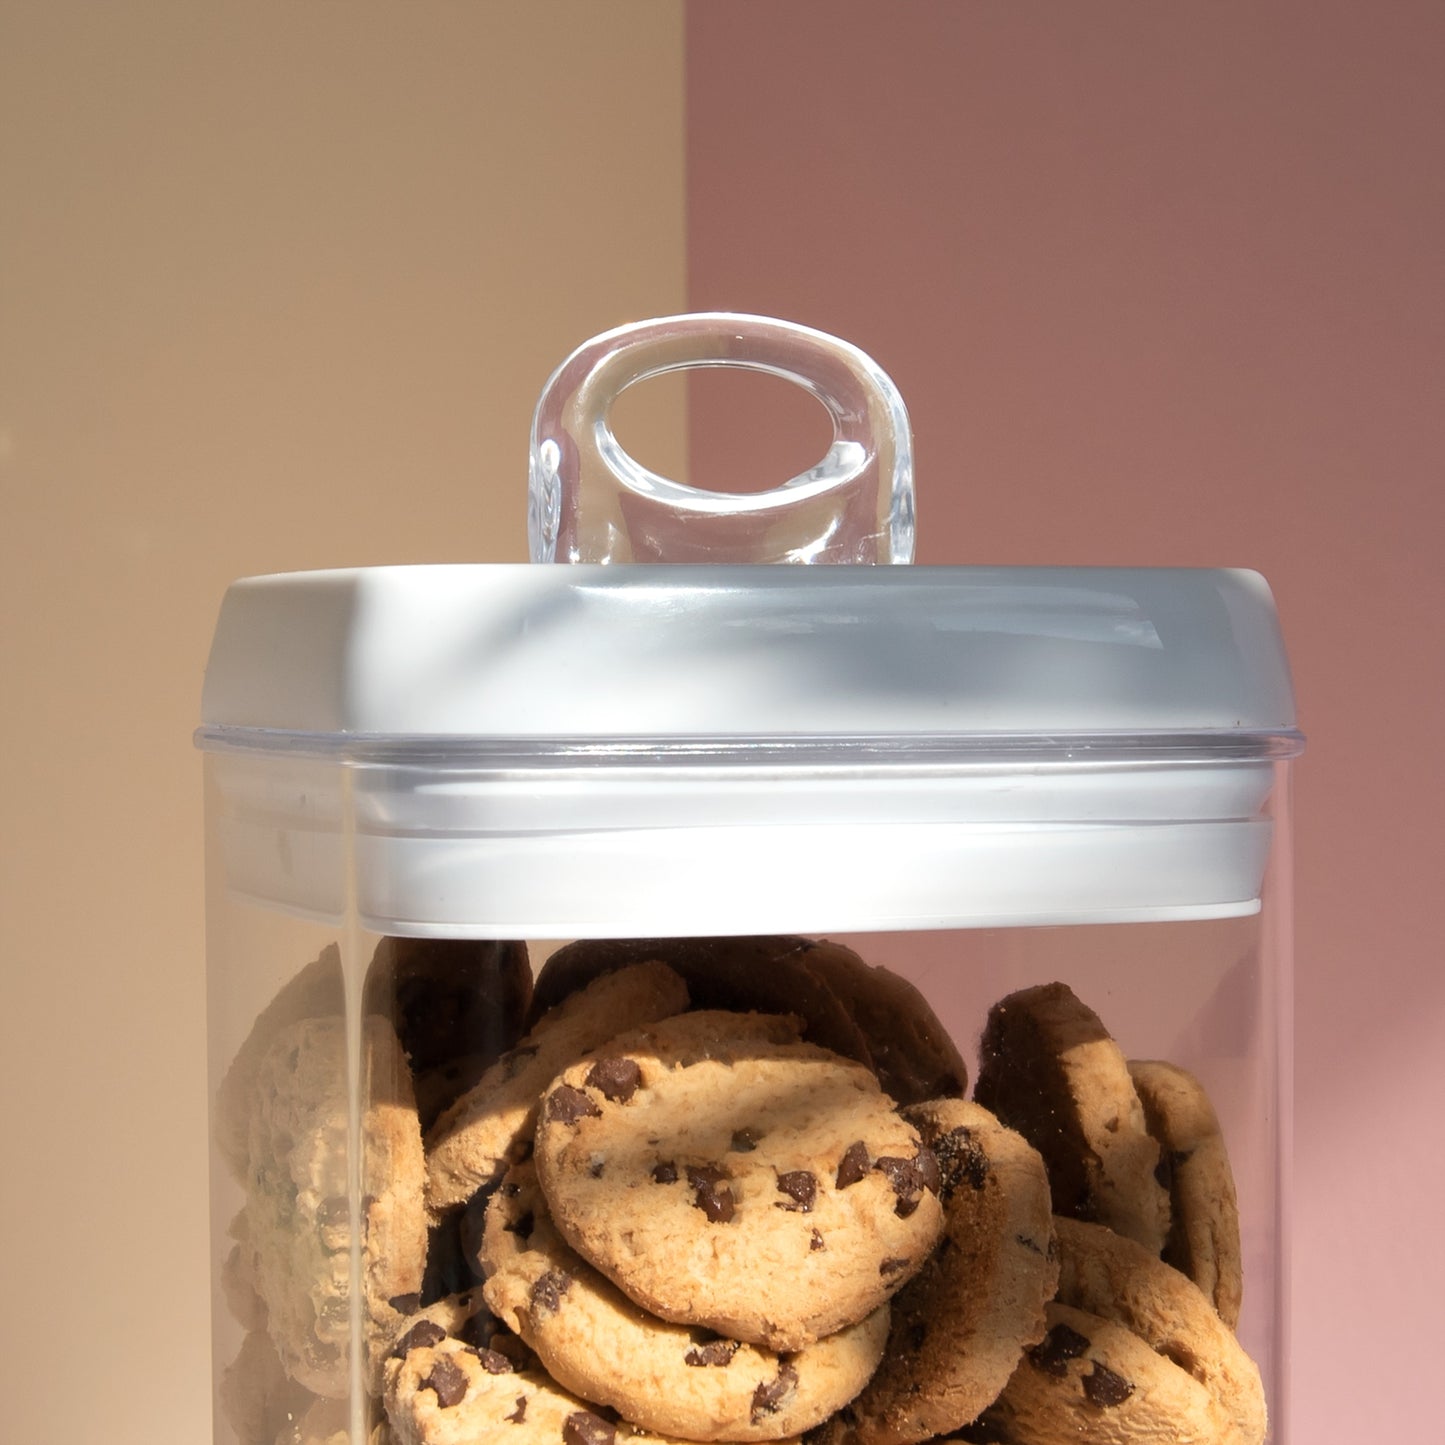 2.5 Litre Acrylic Food Storage Container - Ideal for biscuits, pasta and more